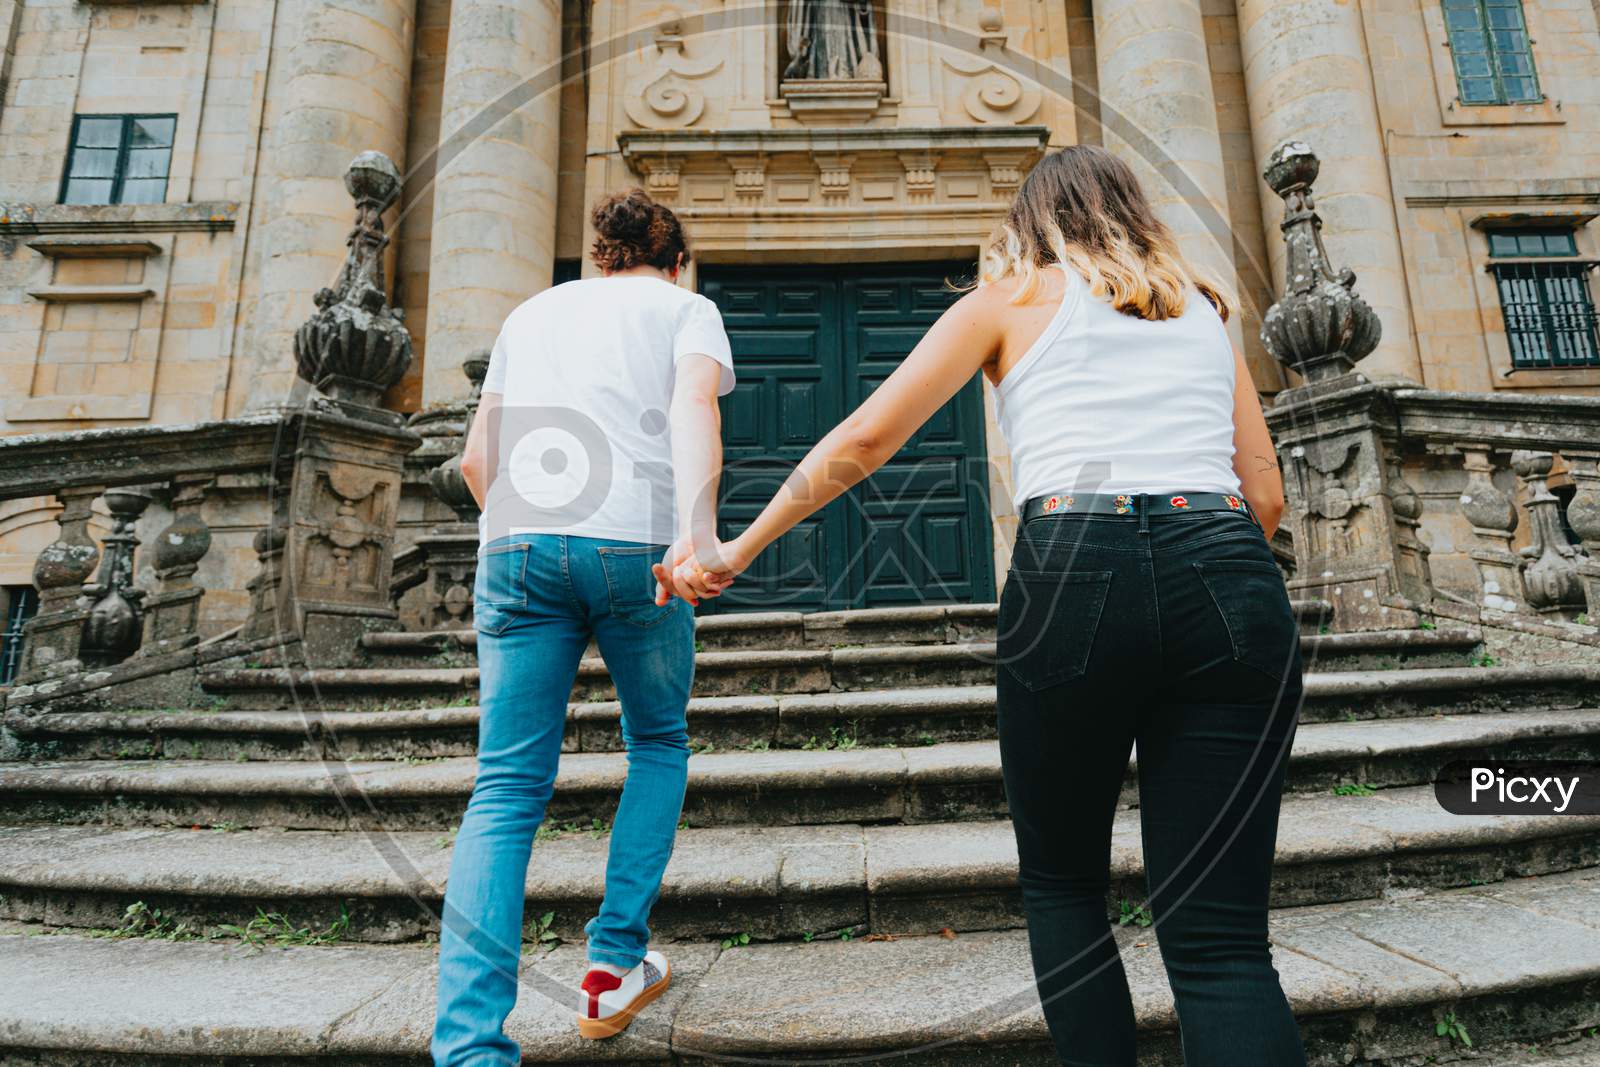 Young Couple Going Up Stairs While Grabbing Hands In An Ancient Building